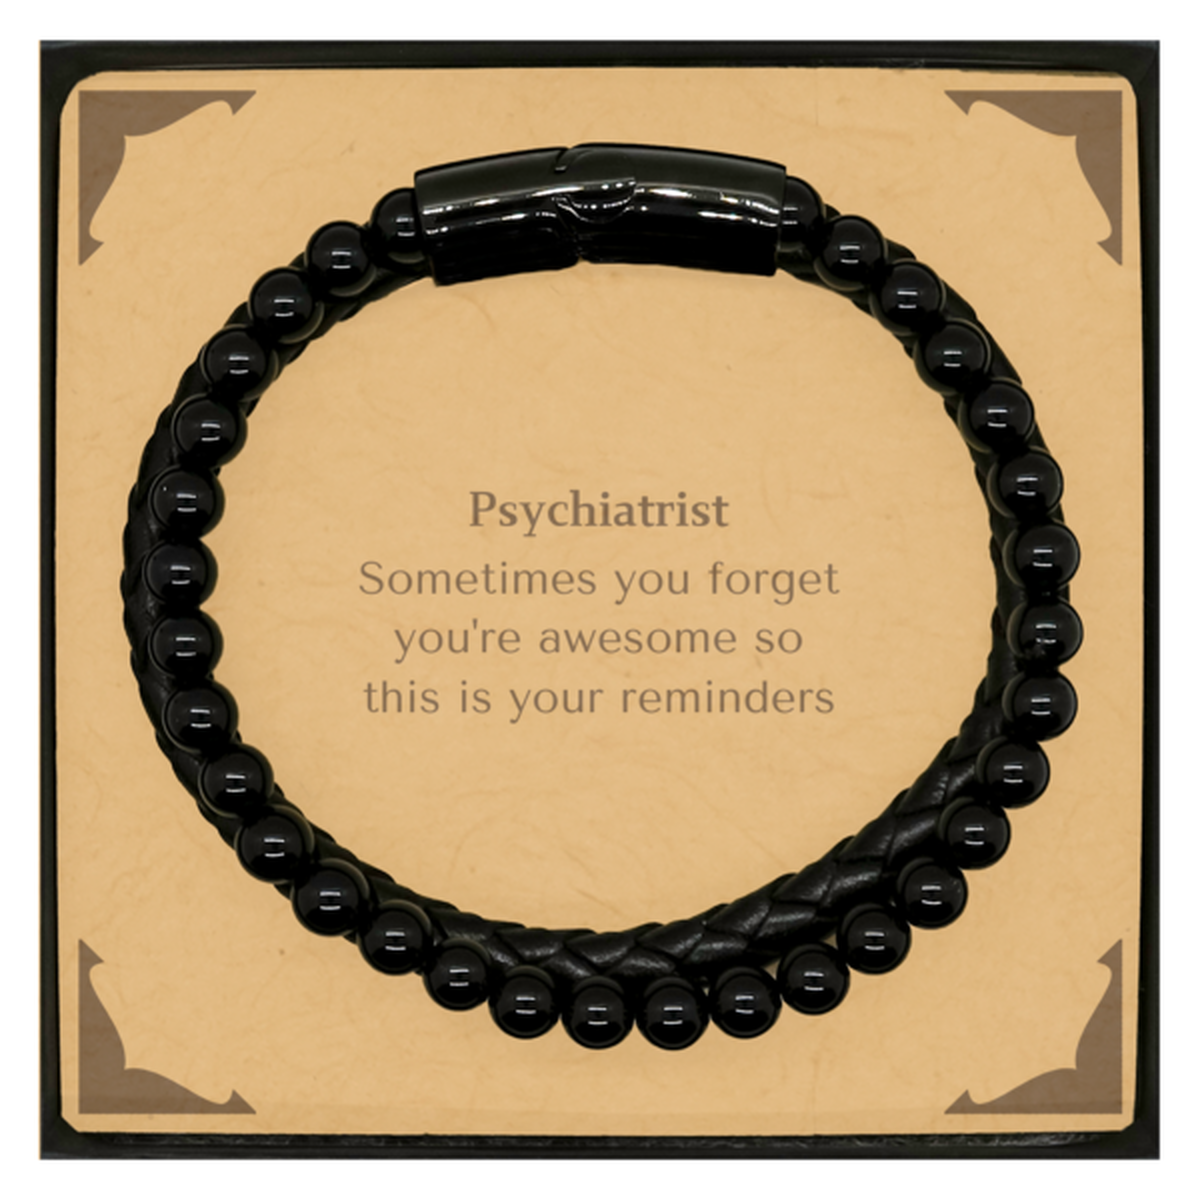 Sentimental Psychiatrist Stone Leather Bracelets, Psychiatrist Sometimes you forget you're awesome so this is your reminders, Graduation Christmas Birthday Gifts for Psychiatrist, Men, Women, Coworkers